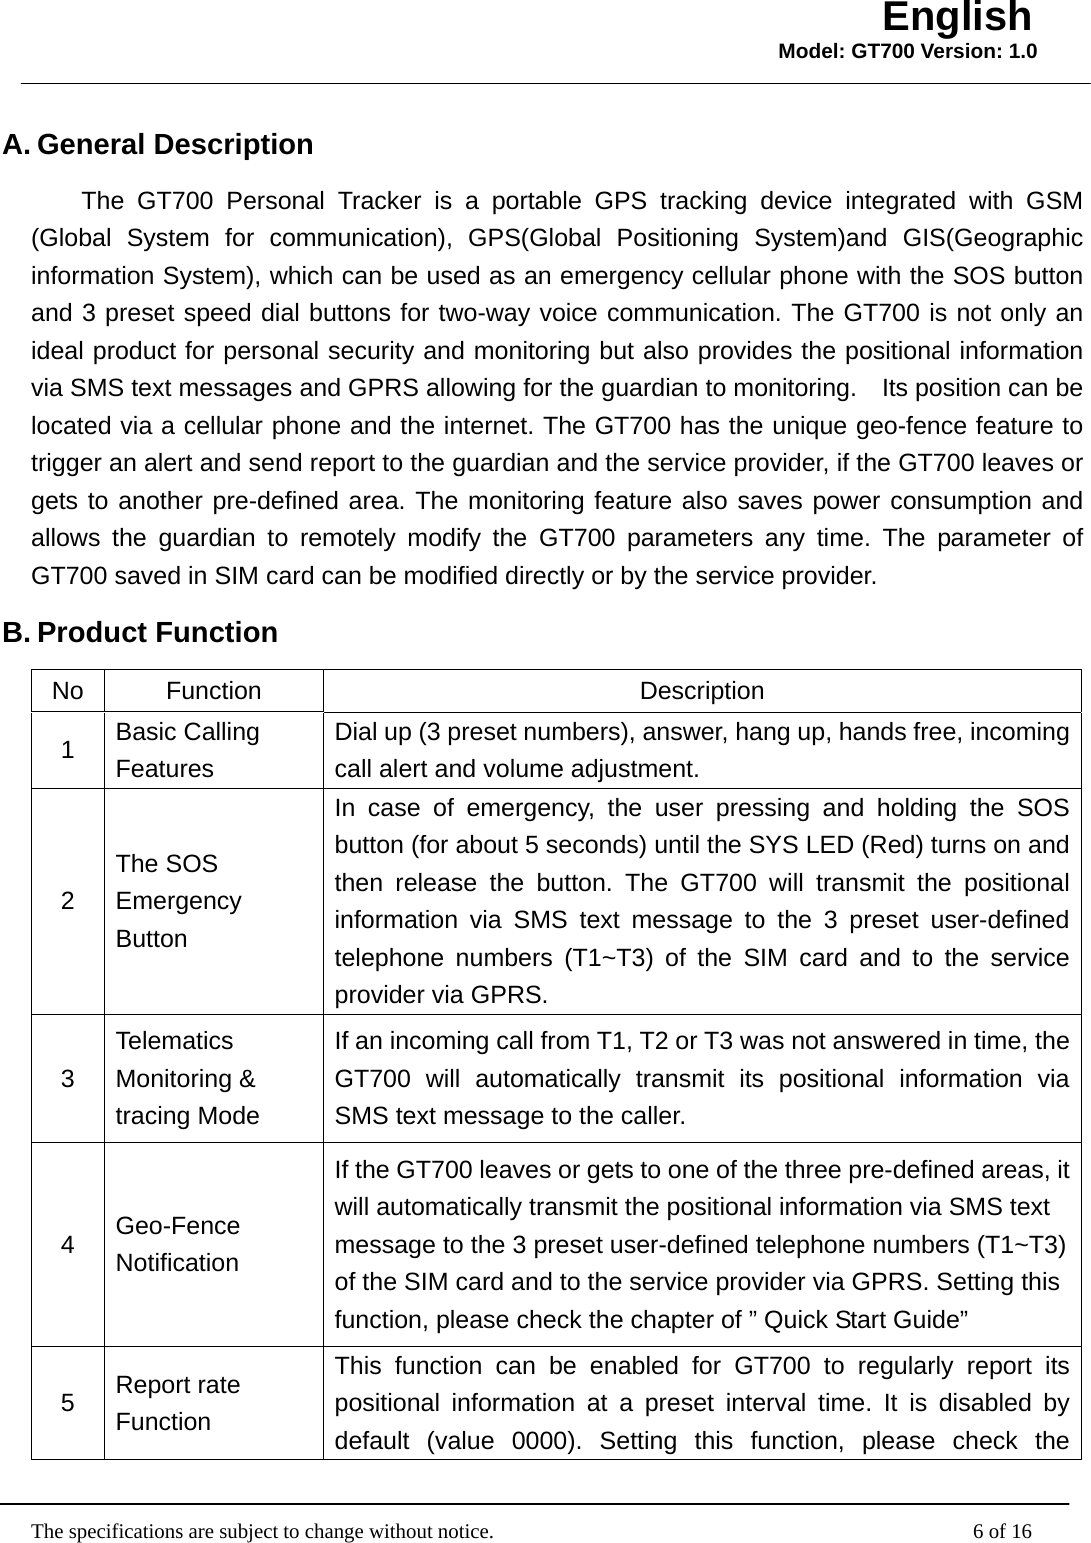                                                   The specifications are subject to change without notice.                                              6 of 16 English Model: GT700 Version: 1.0A. General Description The GT700 Personal Tracker is a portable GPS tracking device integrated with GSM (Global System for communication), GPS(Global Positioning System)and GIS(Geographic information System), which can be used as an emergency cellular phone with the SOS button and 3 preset speed dial buttons for two-way voice communication. The GT700 is not only an ideal product for personal security and monitoring but also provides the positional information via SMS text messages and GPRS allowing for the guardian to monitoring.    Its position can be located via a cellular phone and the internet. The GT700 has the unique geo-fence feature to trigger an alert and send report to the guardian and the service provider, if the GT700 leaves or gets to another pre-defined area. The monitoring feature also saves power consumption and allows the guardian to remotely modify the GT700 parameters any time. The parameter of GT700 saved in SIM card can be modified directly or by the service provider. B. Product Function   No Function  Description 1  Basic Calling Features Dial up (3 preset numbers), answer, hang up, hands free, incoming call alert and volume adjustment. 2 The SOS Emergency Button In case of emergency, the user pressing and holding the SOS button (for about 5 seconds) until the SYS LED (Red) turns on and then release the button. The GT700 will transmit the positional information via SMS text message to the 3 preset user-defined telephone numbers (T1~T3) of the SIM card and to the service provider via GPRS. 3 Telematics Monitoring &amp; tracing Mode If an incoming call from T1, T2 or T3 was not answered in time, the GT700 will automatically transmit its positional information via SMS text message to the caller. 4  Geo-Fence Notification If the GT700 leaves or gets to one of the three pre-defined areas, it will automatically transmit the positional information via SMS text message to the 3 preset user-defined telephone numbers (T1~T3) of the SIM card and to the service provider via GPRS. Setting this function, please check the chapter of ” Quick Start Guide” 5  Report rate Function This function can be enabled for GT700 to regularly report its positional information at a preset interval time. It is disabled by default (value 0000). Setting this function, please check the 